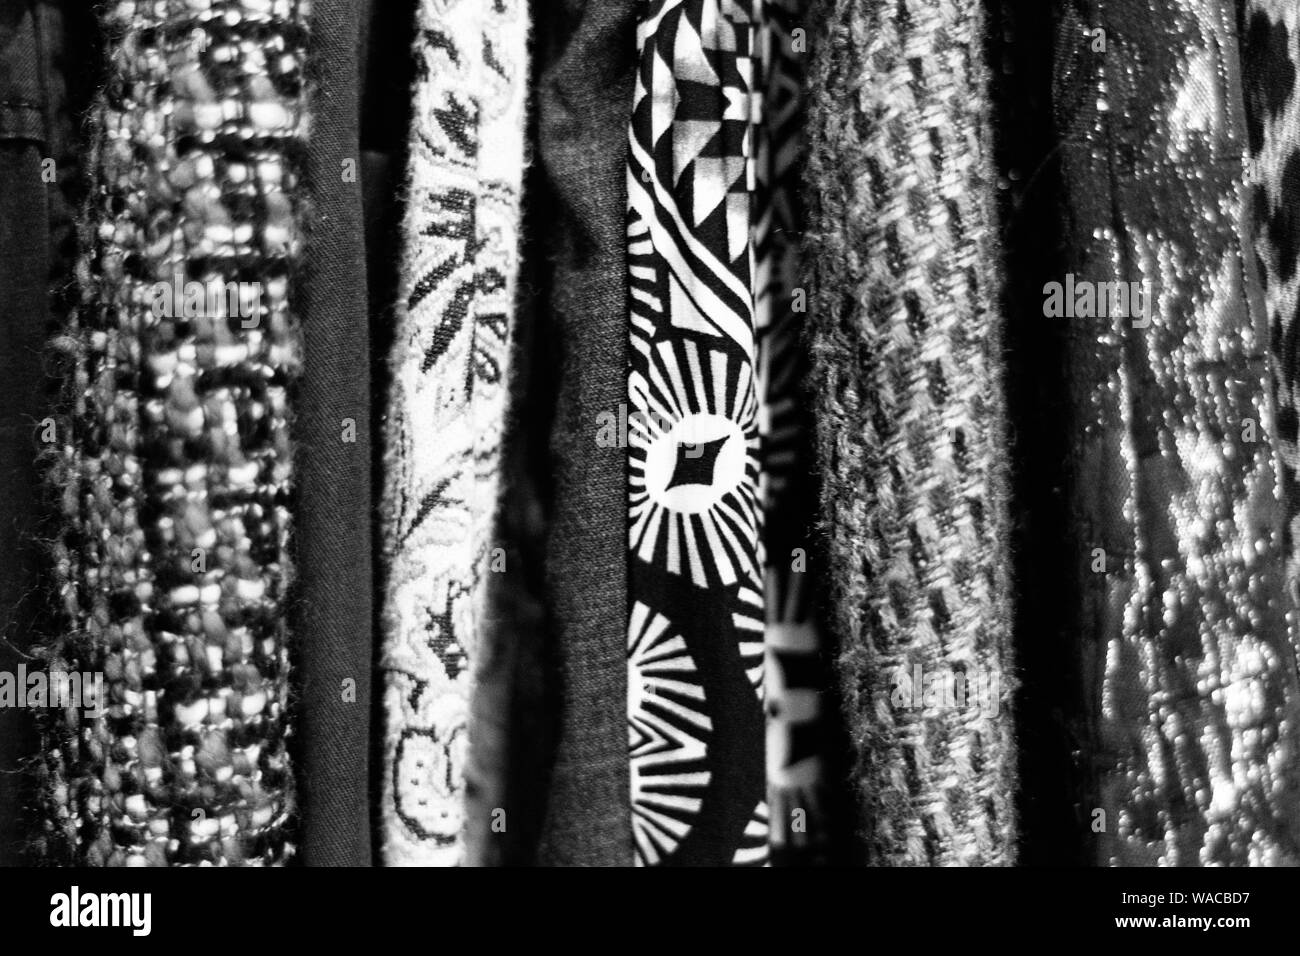 Sleeves of clothes hanging in a used clothing store make an abstract of texture, patterns and lines Stock Photo